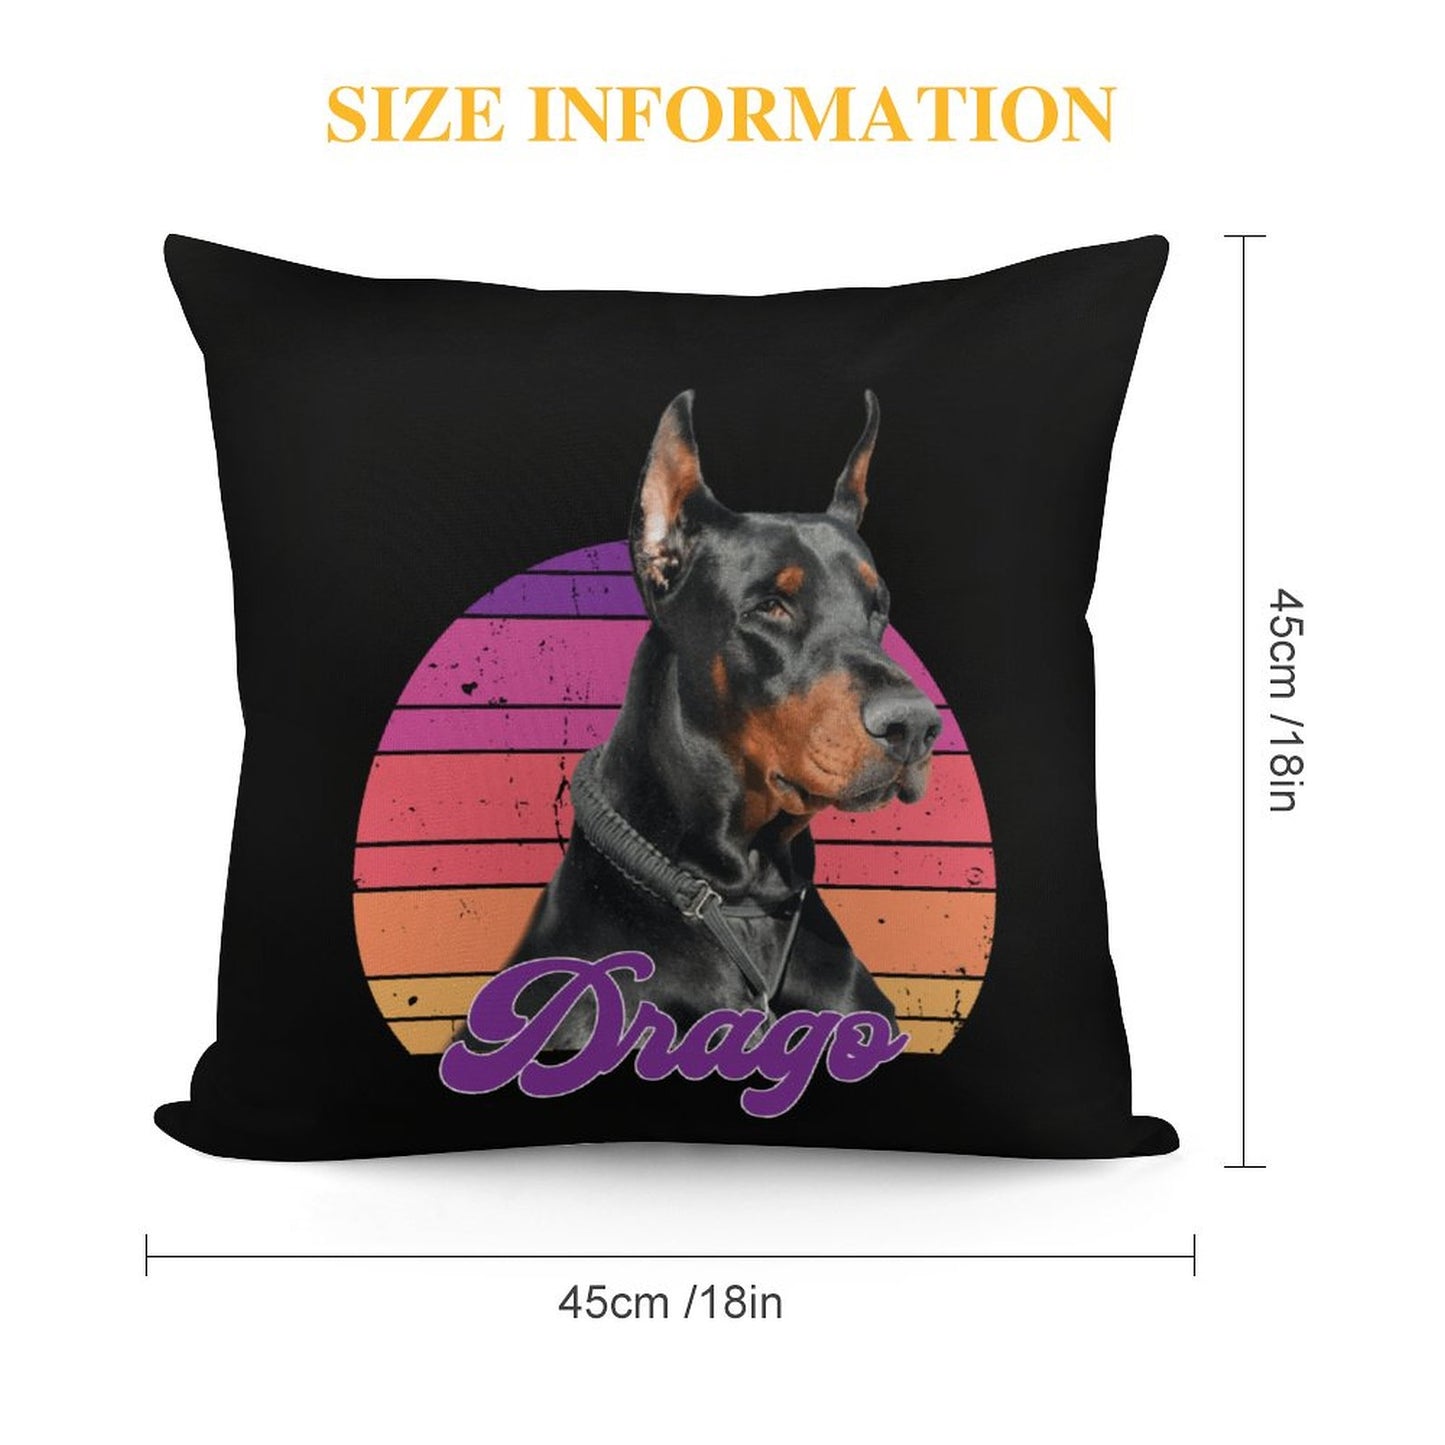 DRAGO - Square Plush Throw Pillow Cover (Pillow Excluded) (Dual Printing)